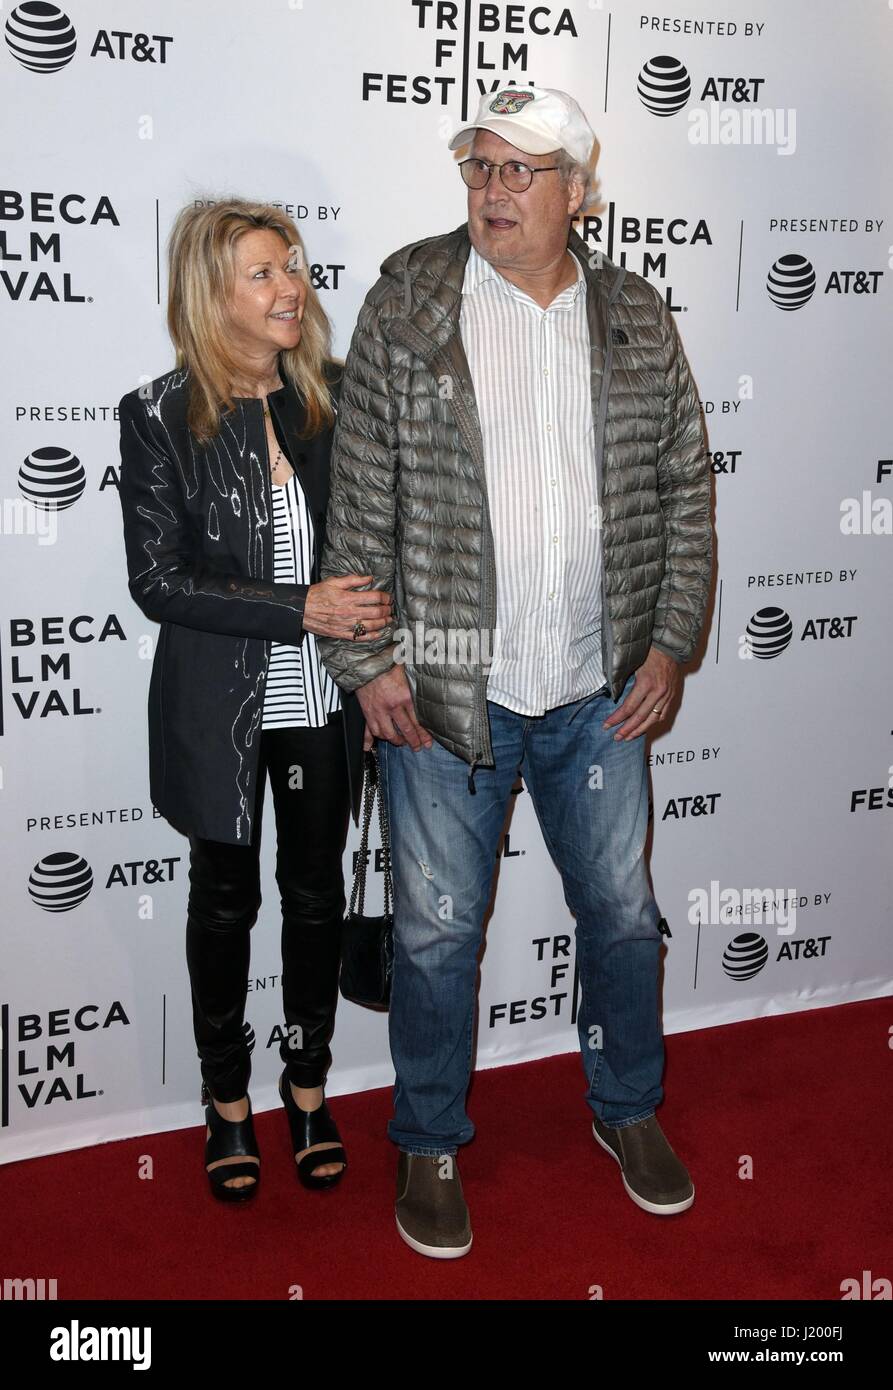 New York, NY, USA. 22nd Apr, 2017. Jayni Chase, Chevy Chase at arrivals for DOG YEARS Premiere at the 2017 Tribeca Film Festival, Cinepolis Chelsea, New York, NY April 22, 2017. Credit: Derek Storm/Everett Collection/Alamy Live News Stock Photo